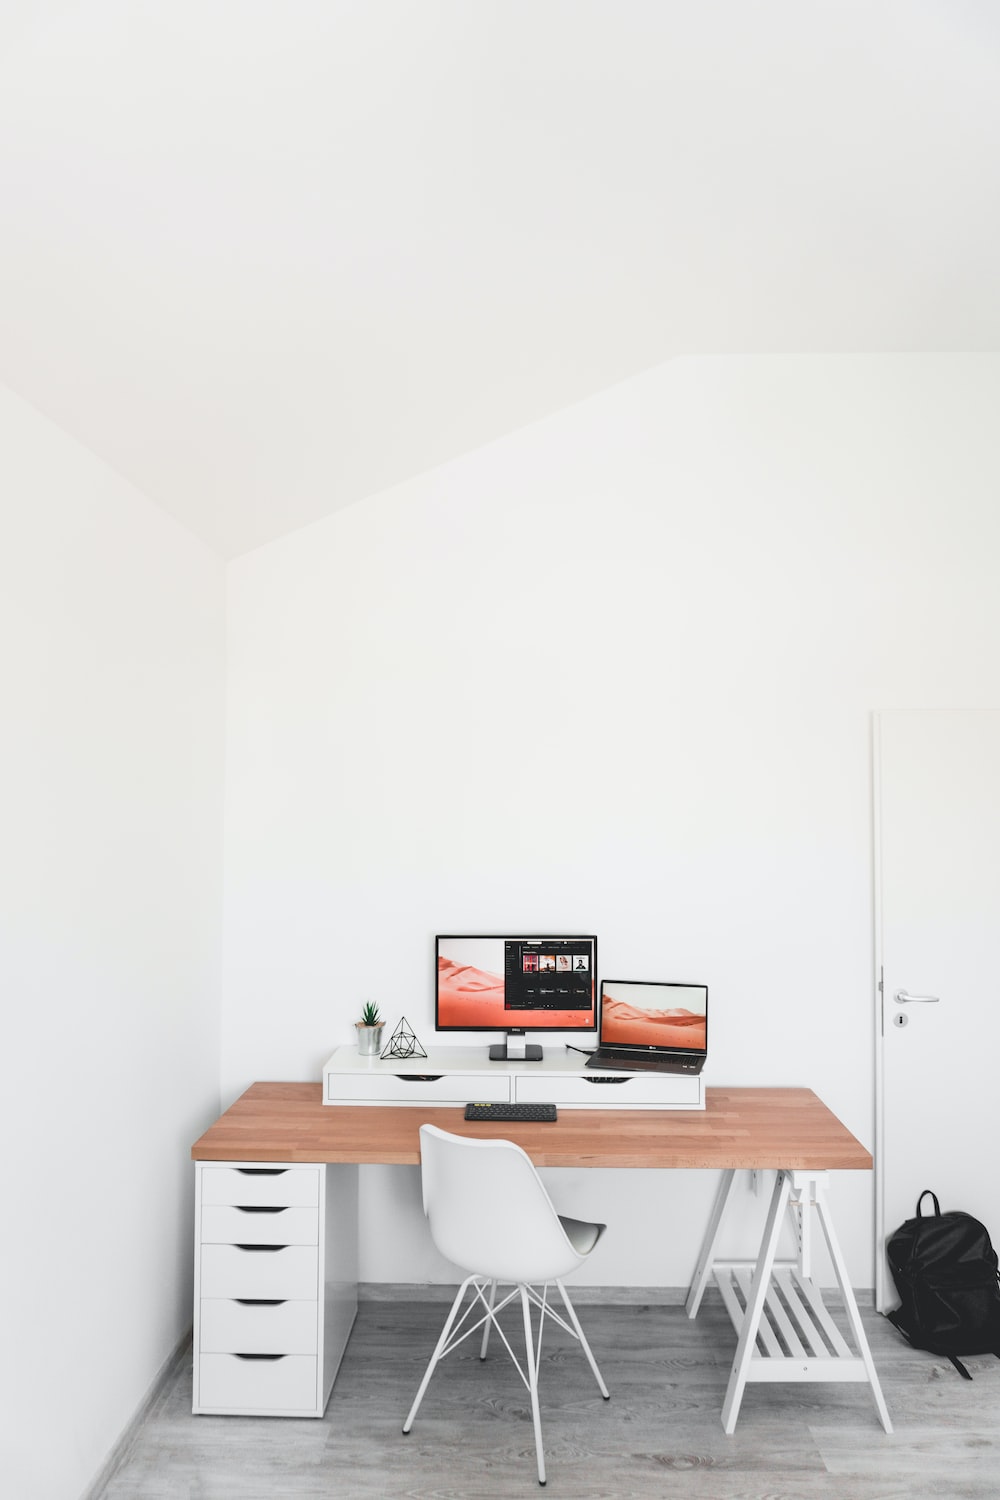 Should I put my desk against a wall?